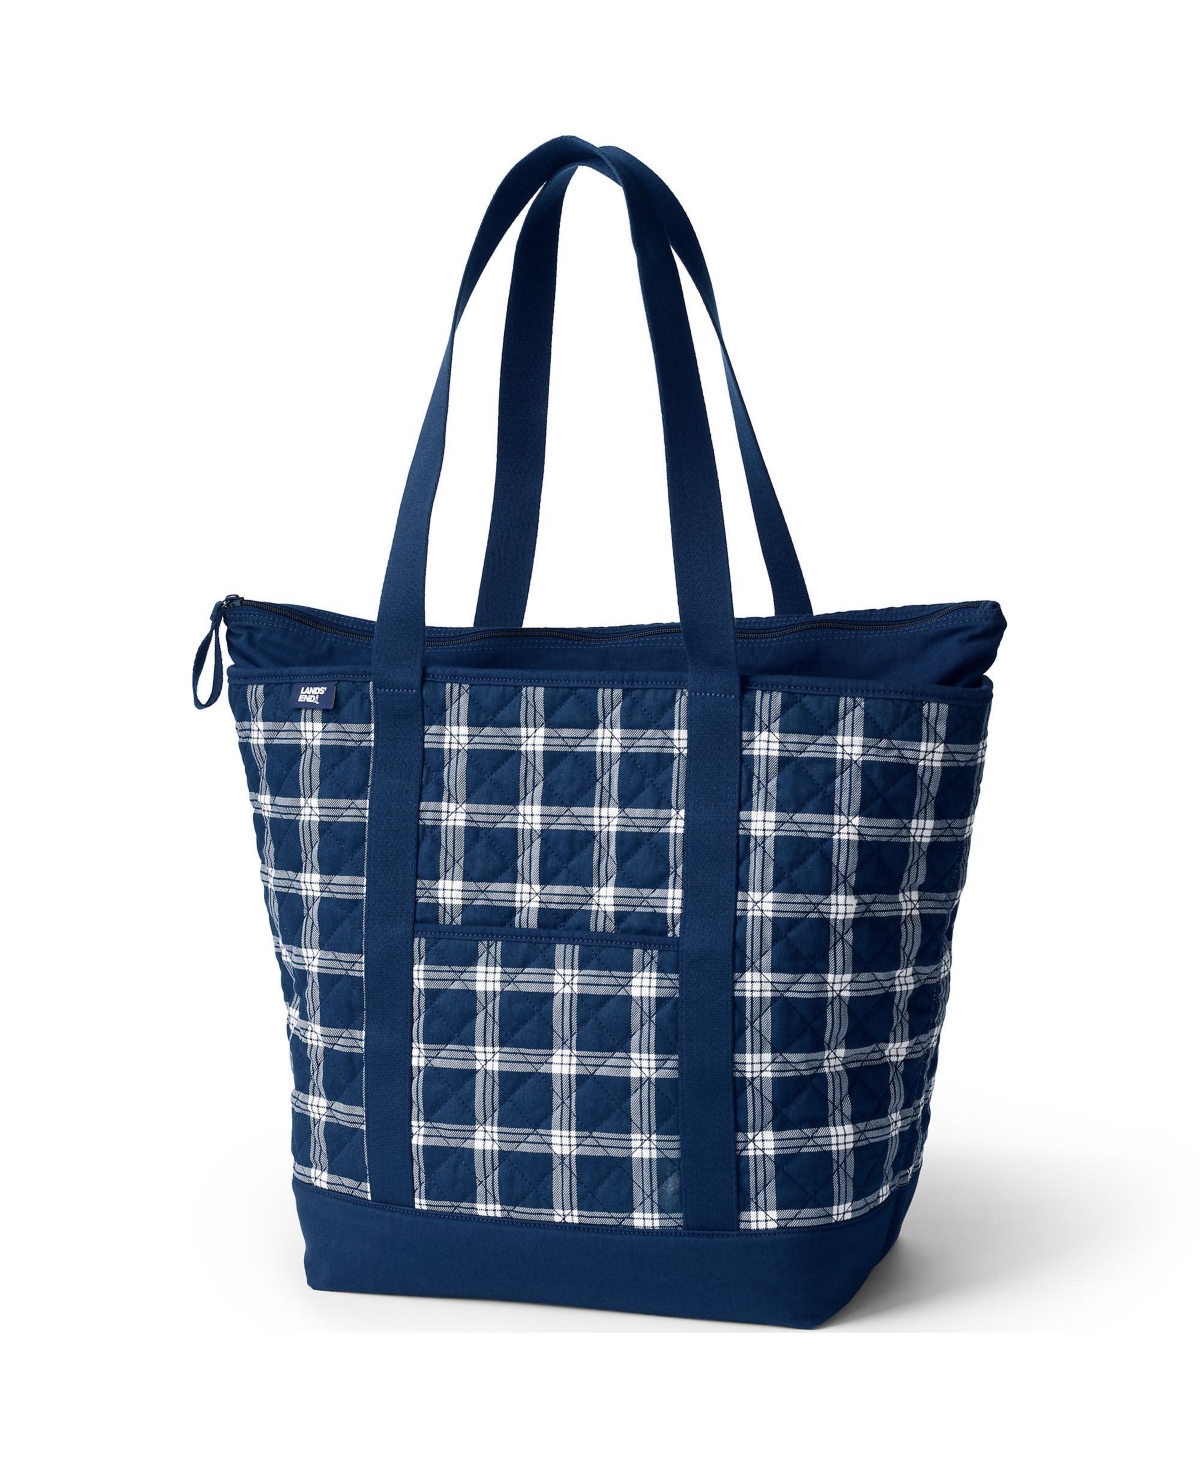 Large Classic Quilted Tote Bag - Navy/ivory founders plaid